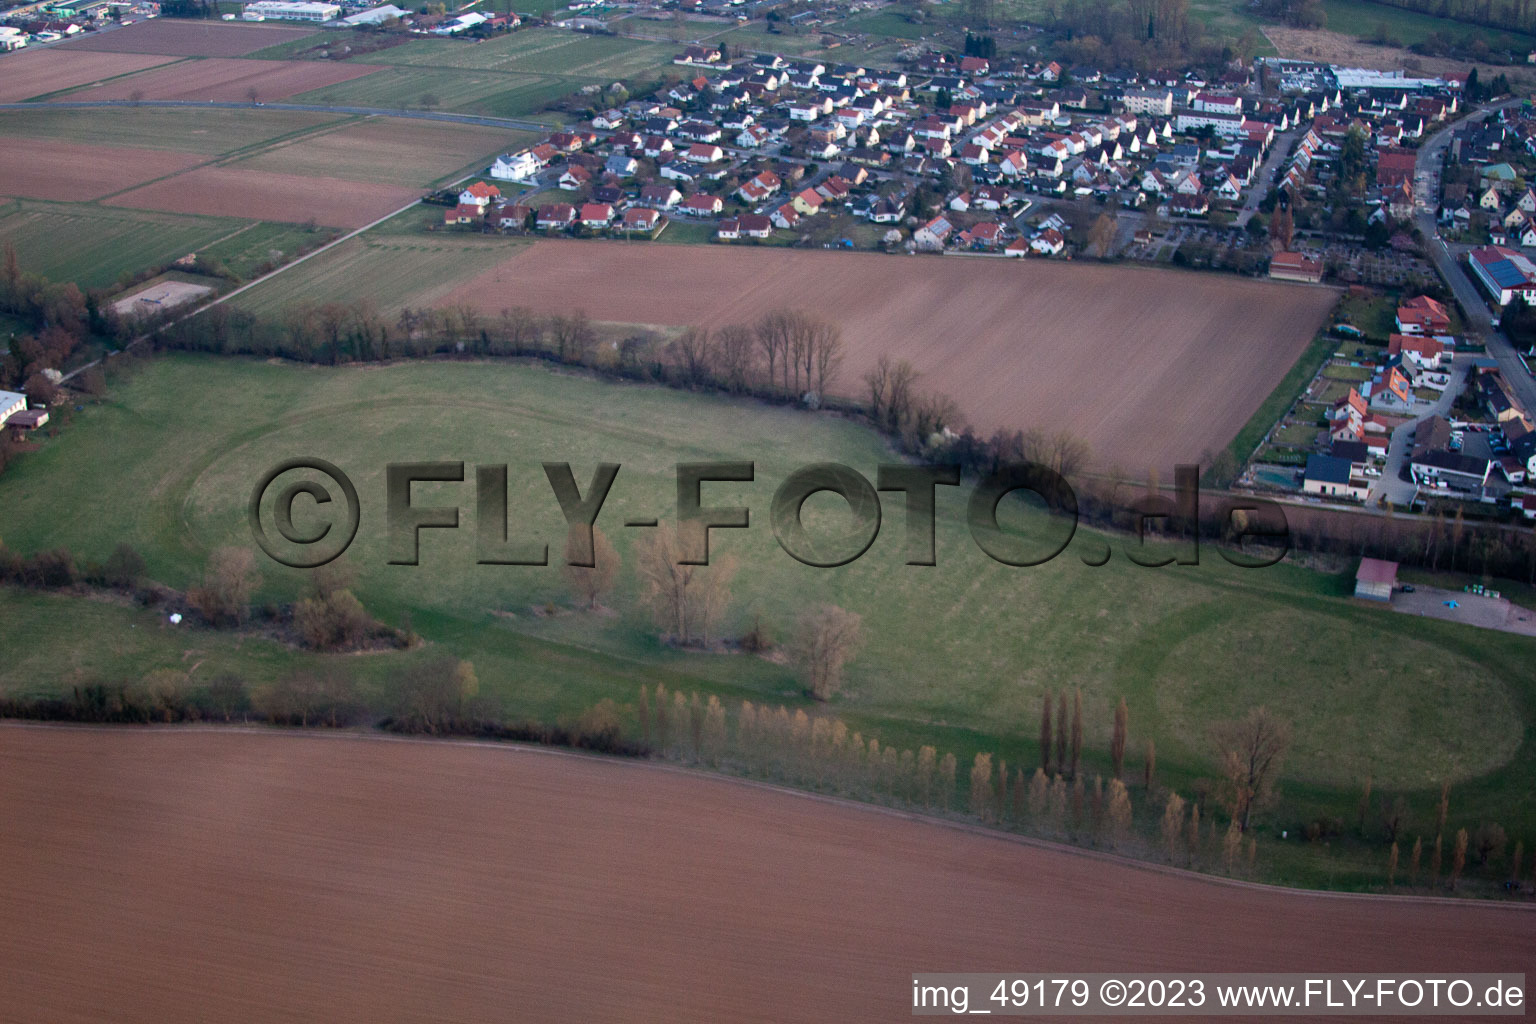 Oblique view of Racetrack in the district Billigheim in Billigheim-Ingenheim in the state Rhineland-Palatinate, Germany